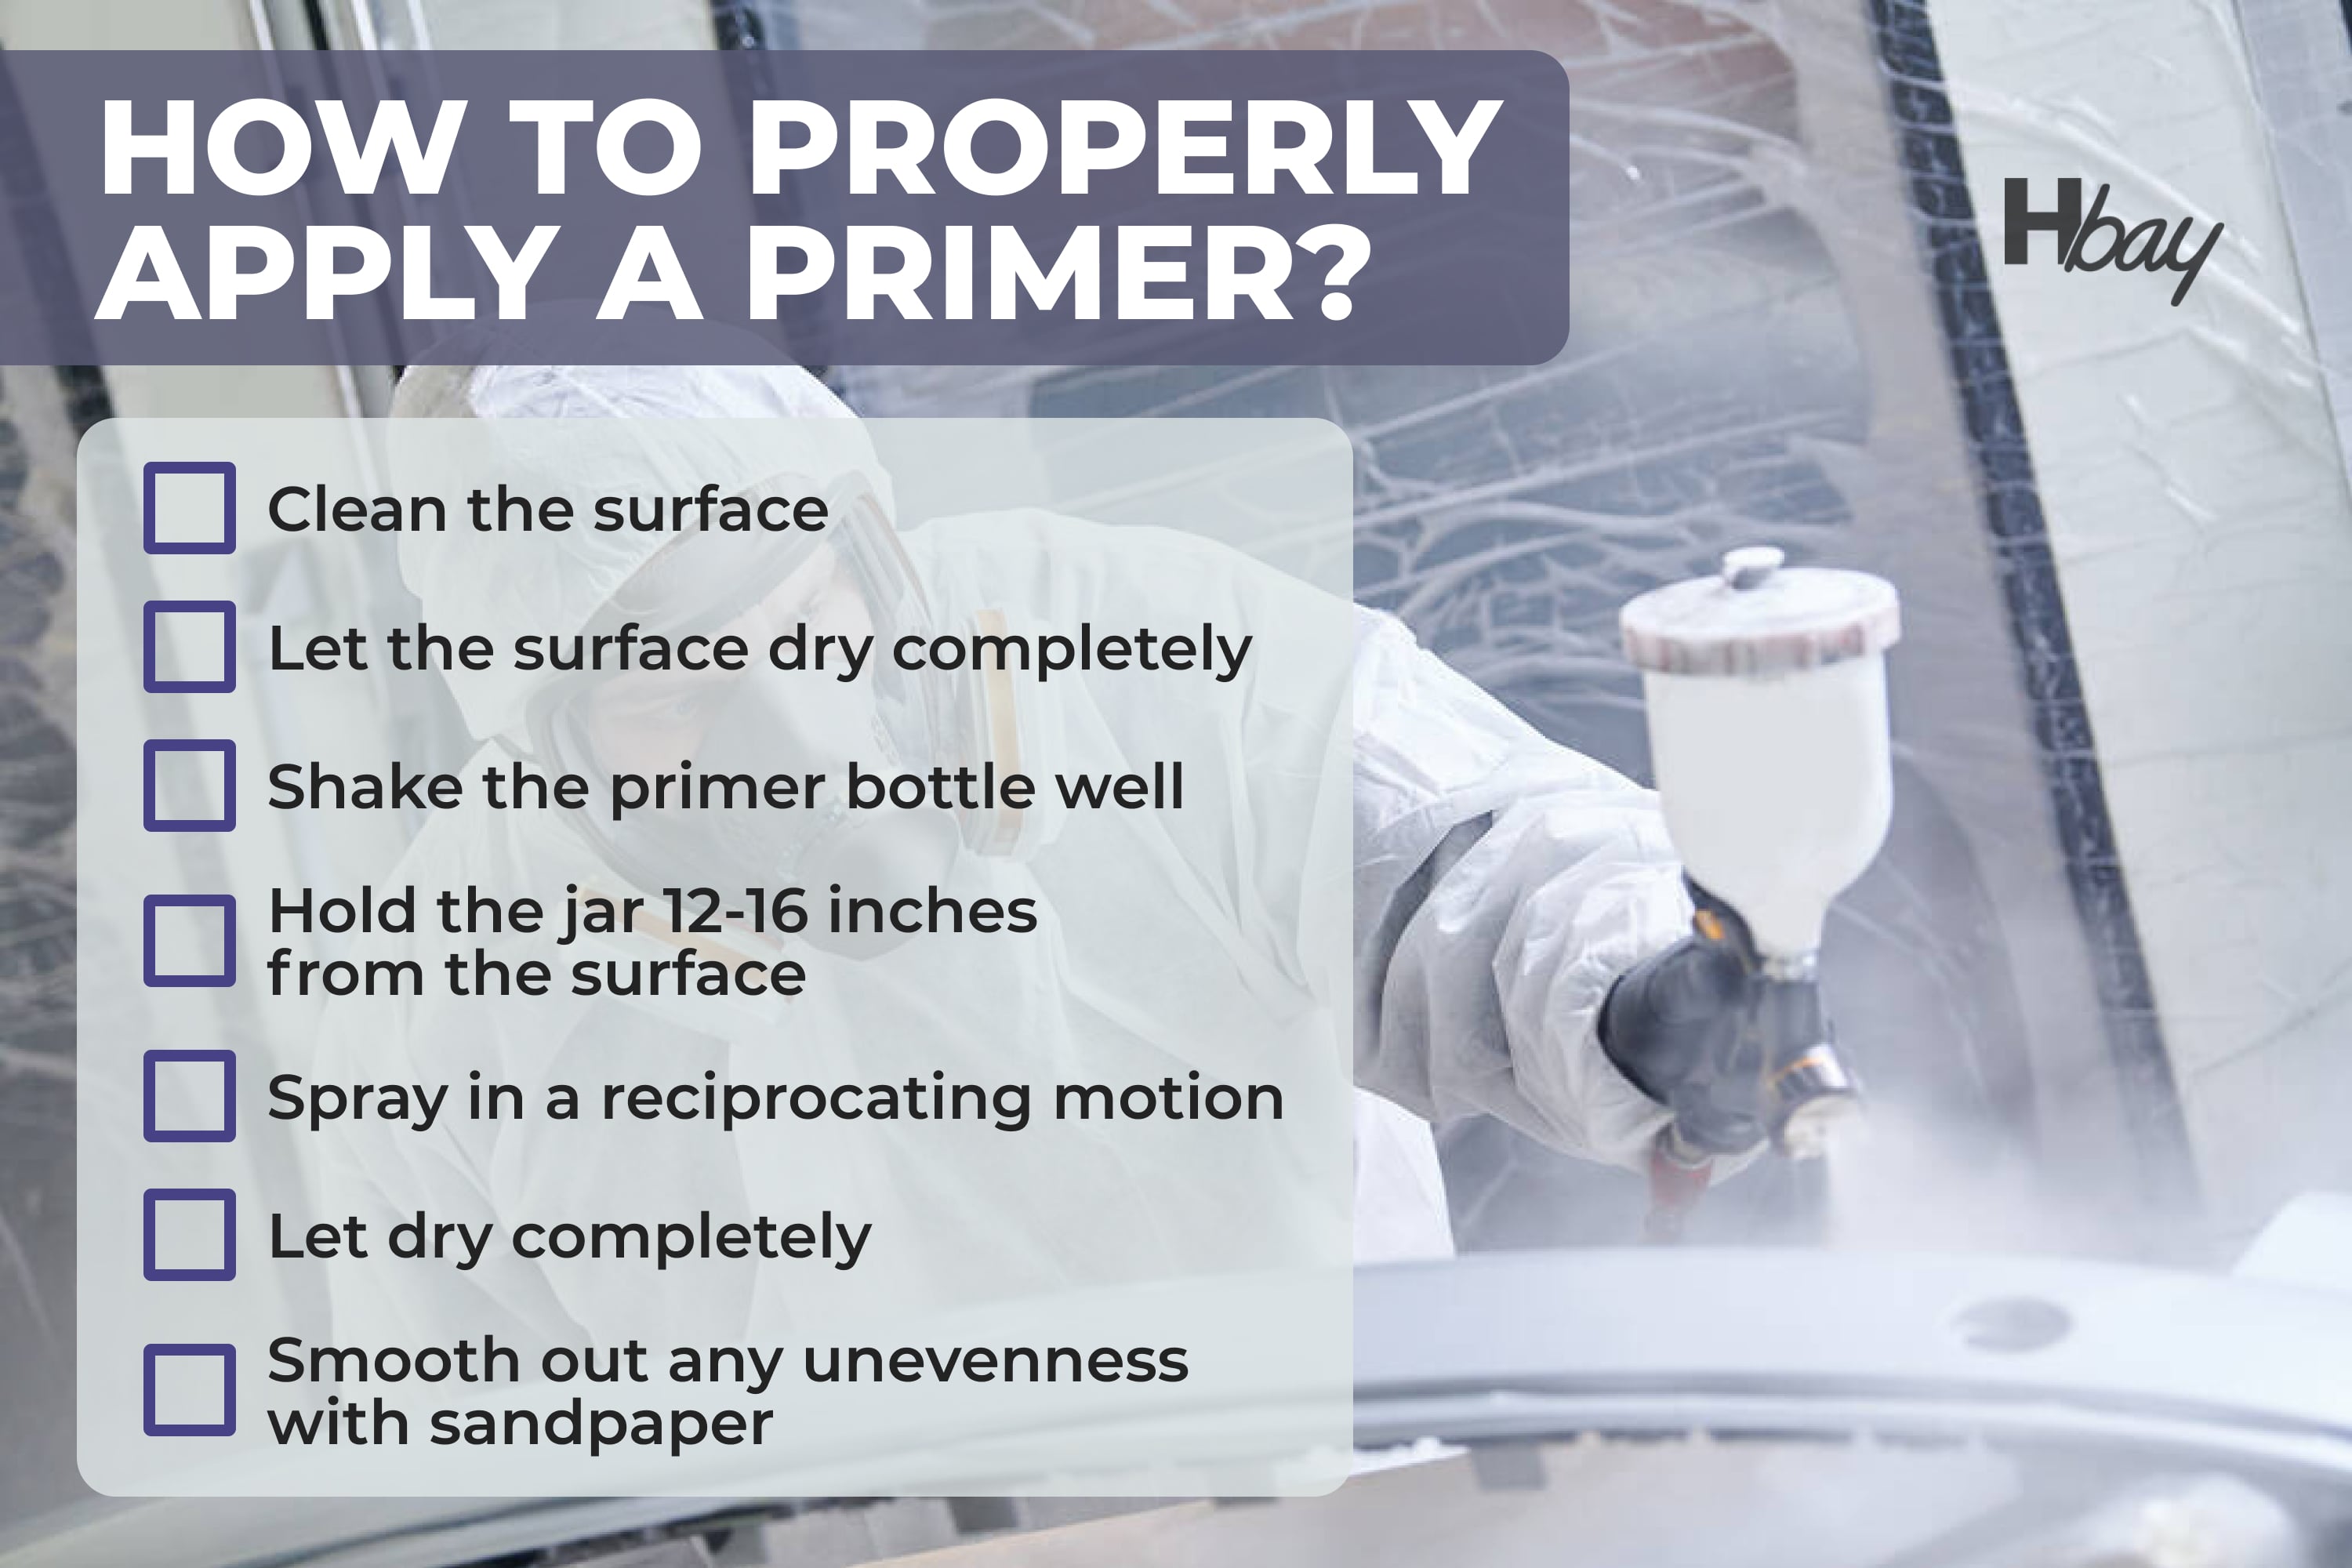 How to properly apply a primeR